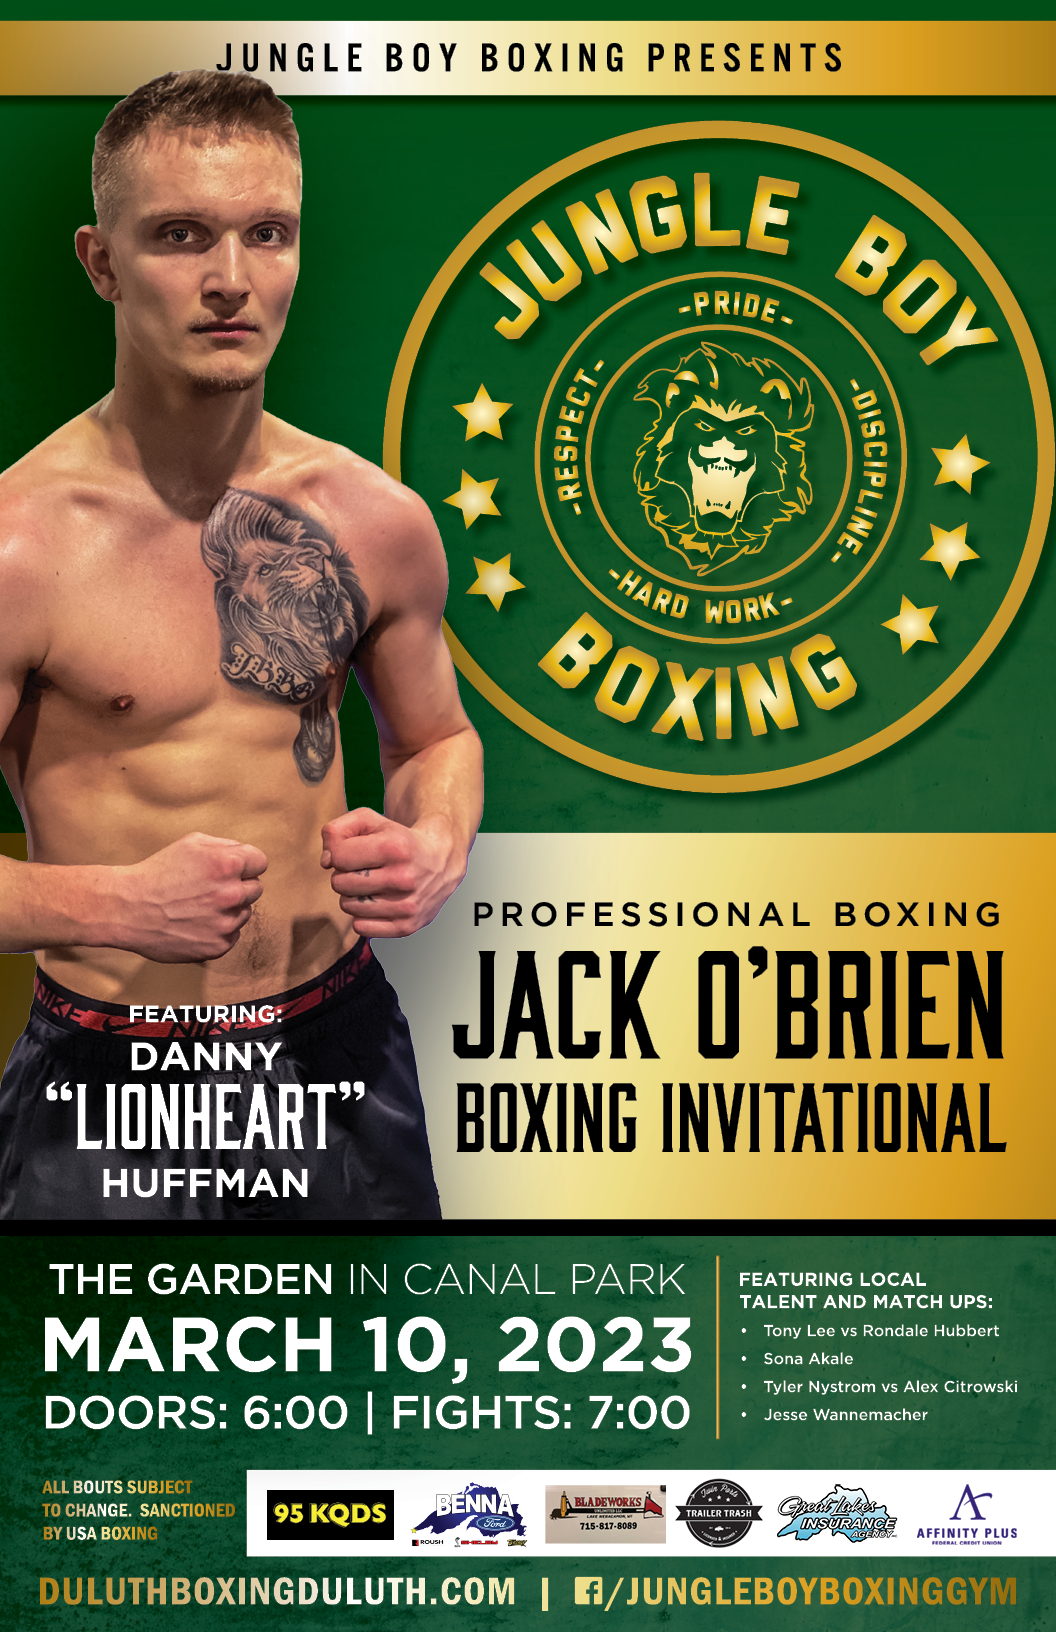 Benna Ford Jeep Ram sponsoring the Jack O'Brien Boxing Invitational featuring Danny Lionheart Huffman